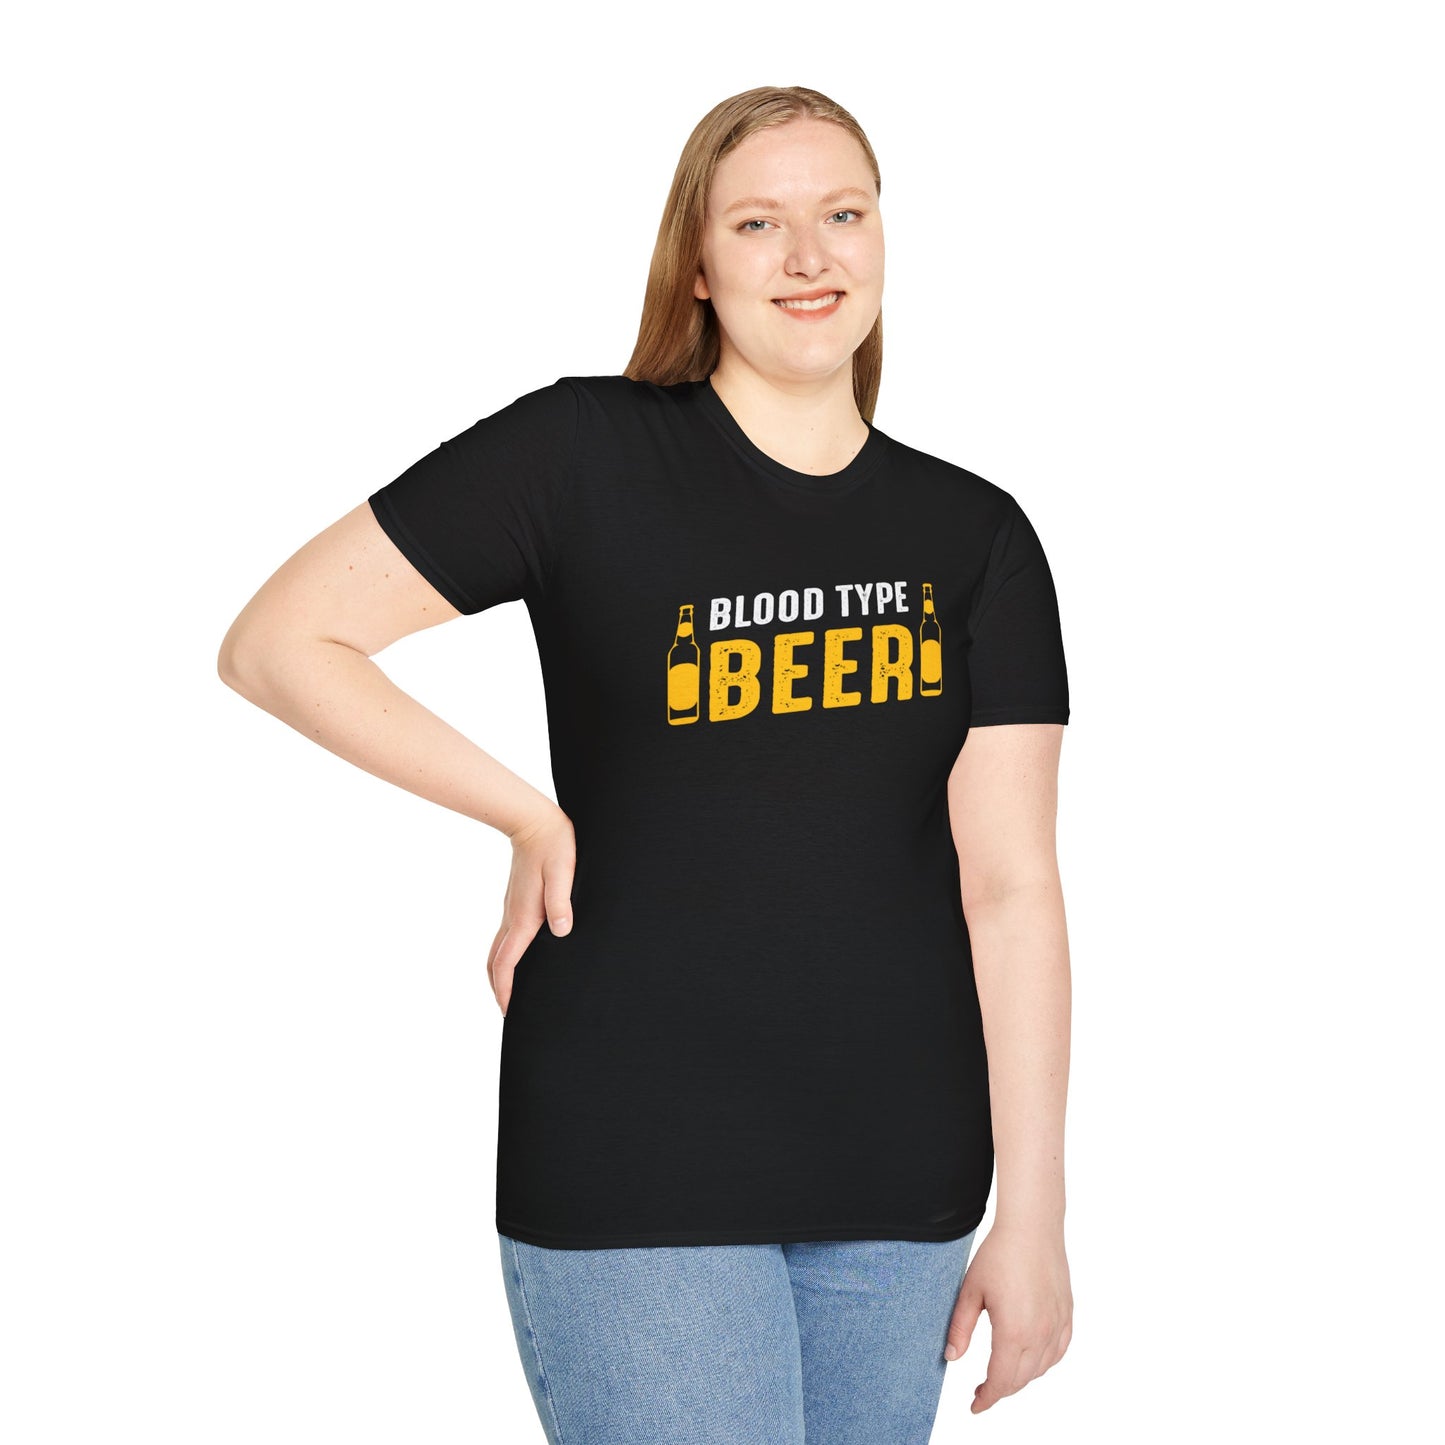 Unique and Stylish Blood Type BEER T-Shirt - A Fun Twist to Your Wardrobe!